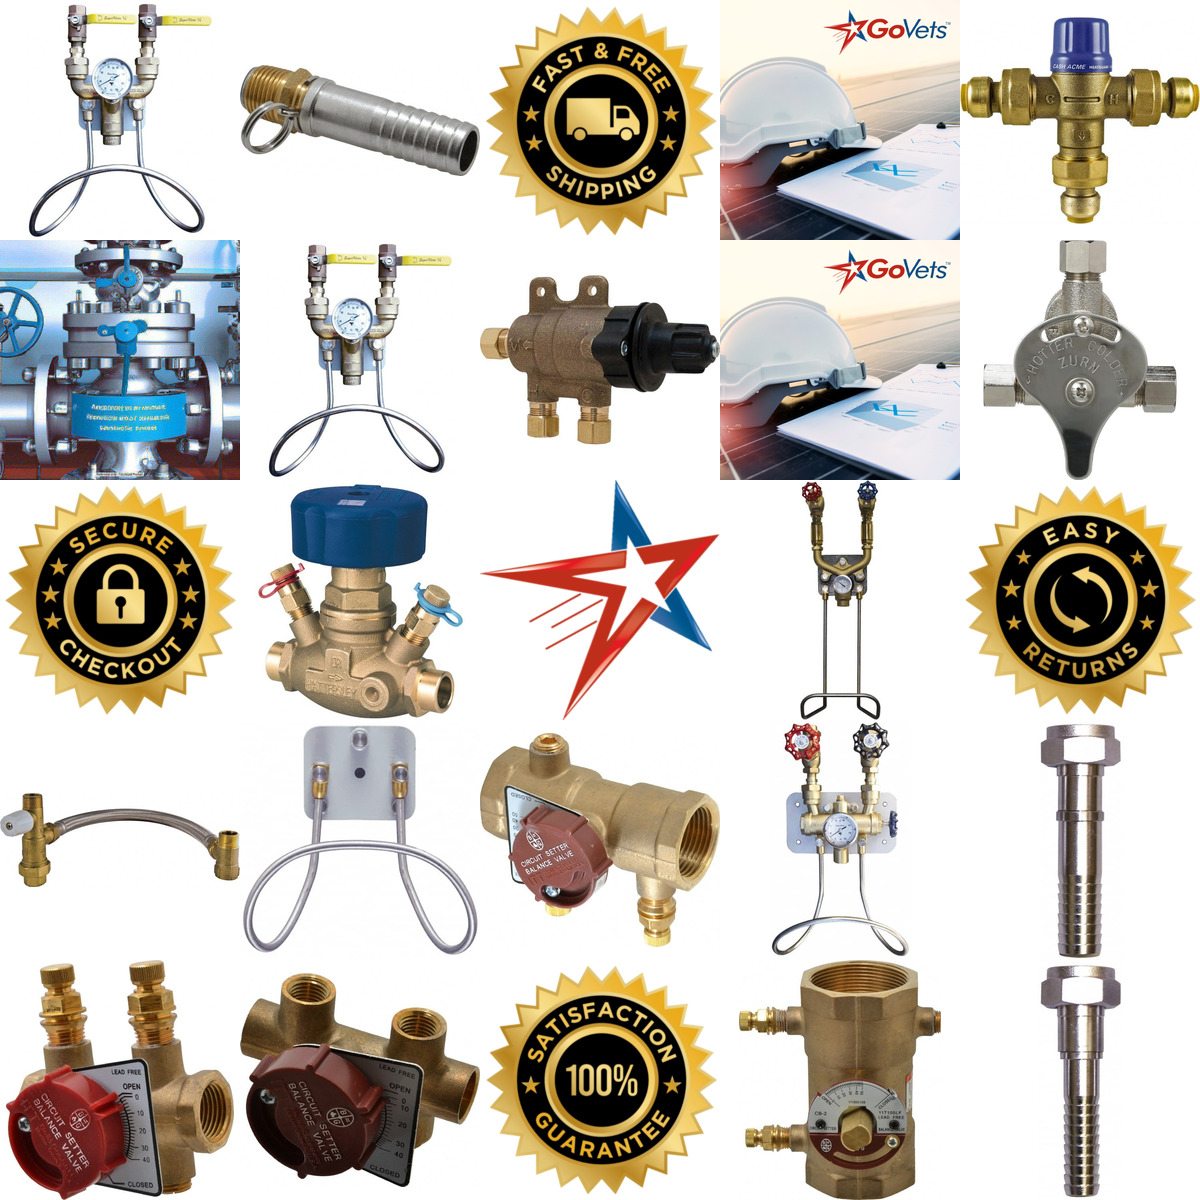 A selection of Steam and Water Mixing and Tempering Valves products on GoVets